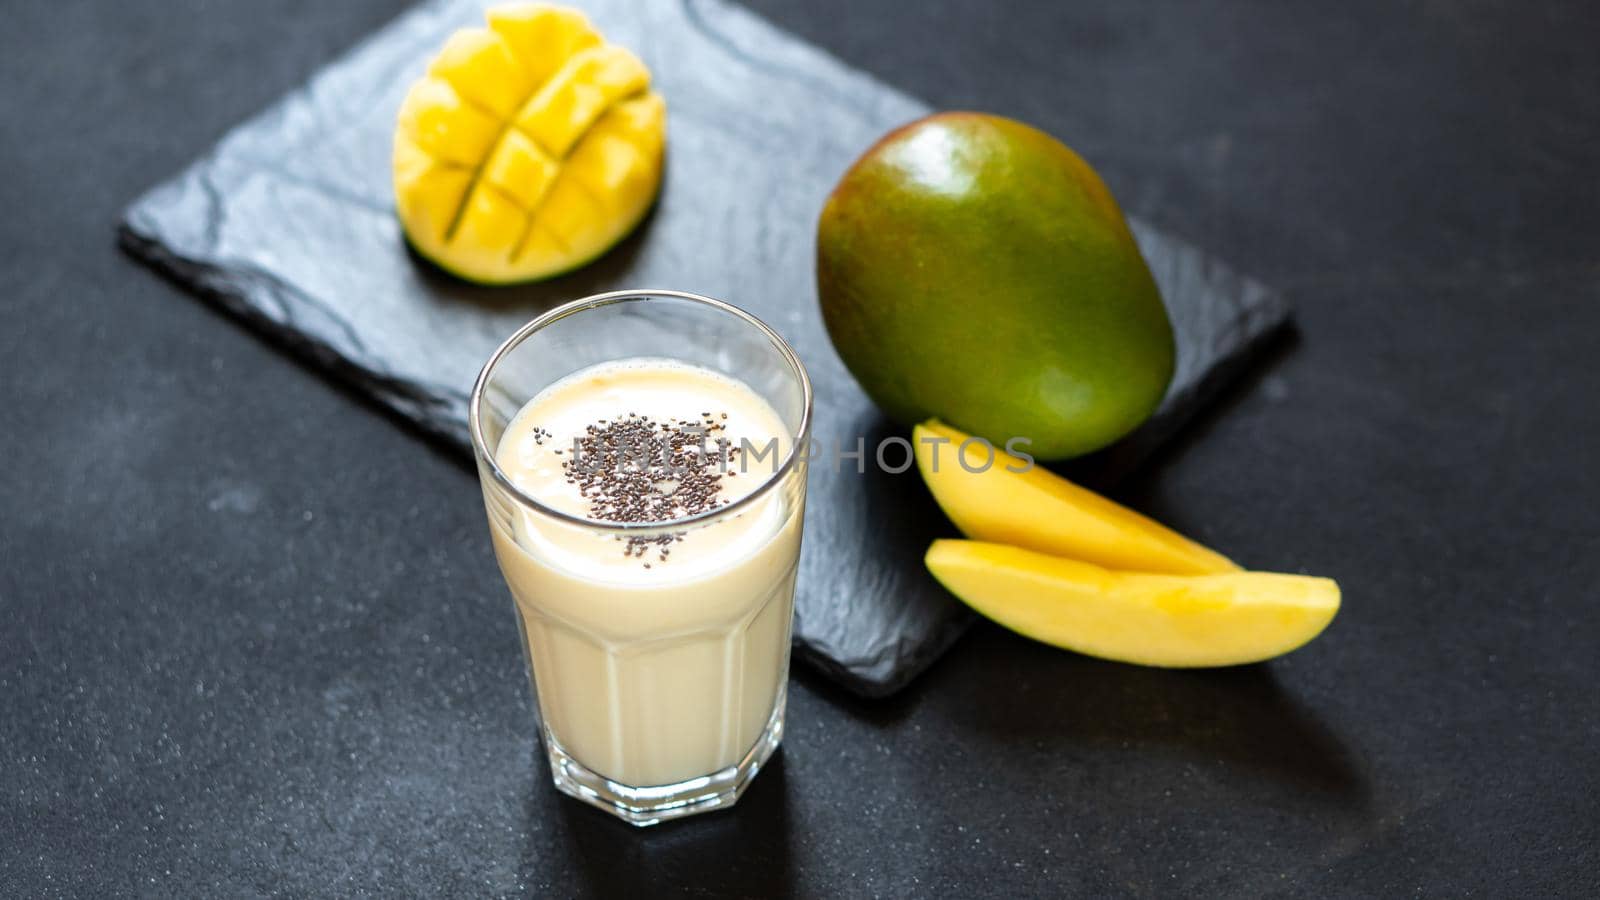 Cool mango milkshake on a black background. A drink to quench your thirst in the summer. Indian cuisine classic drink - Lassi. Milk, yogurt with mango chunks.